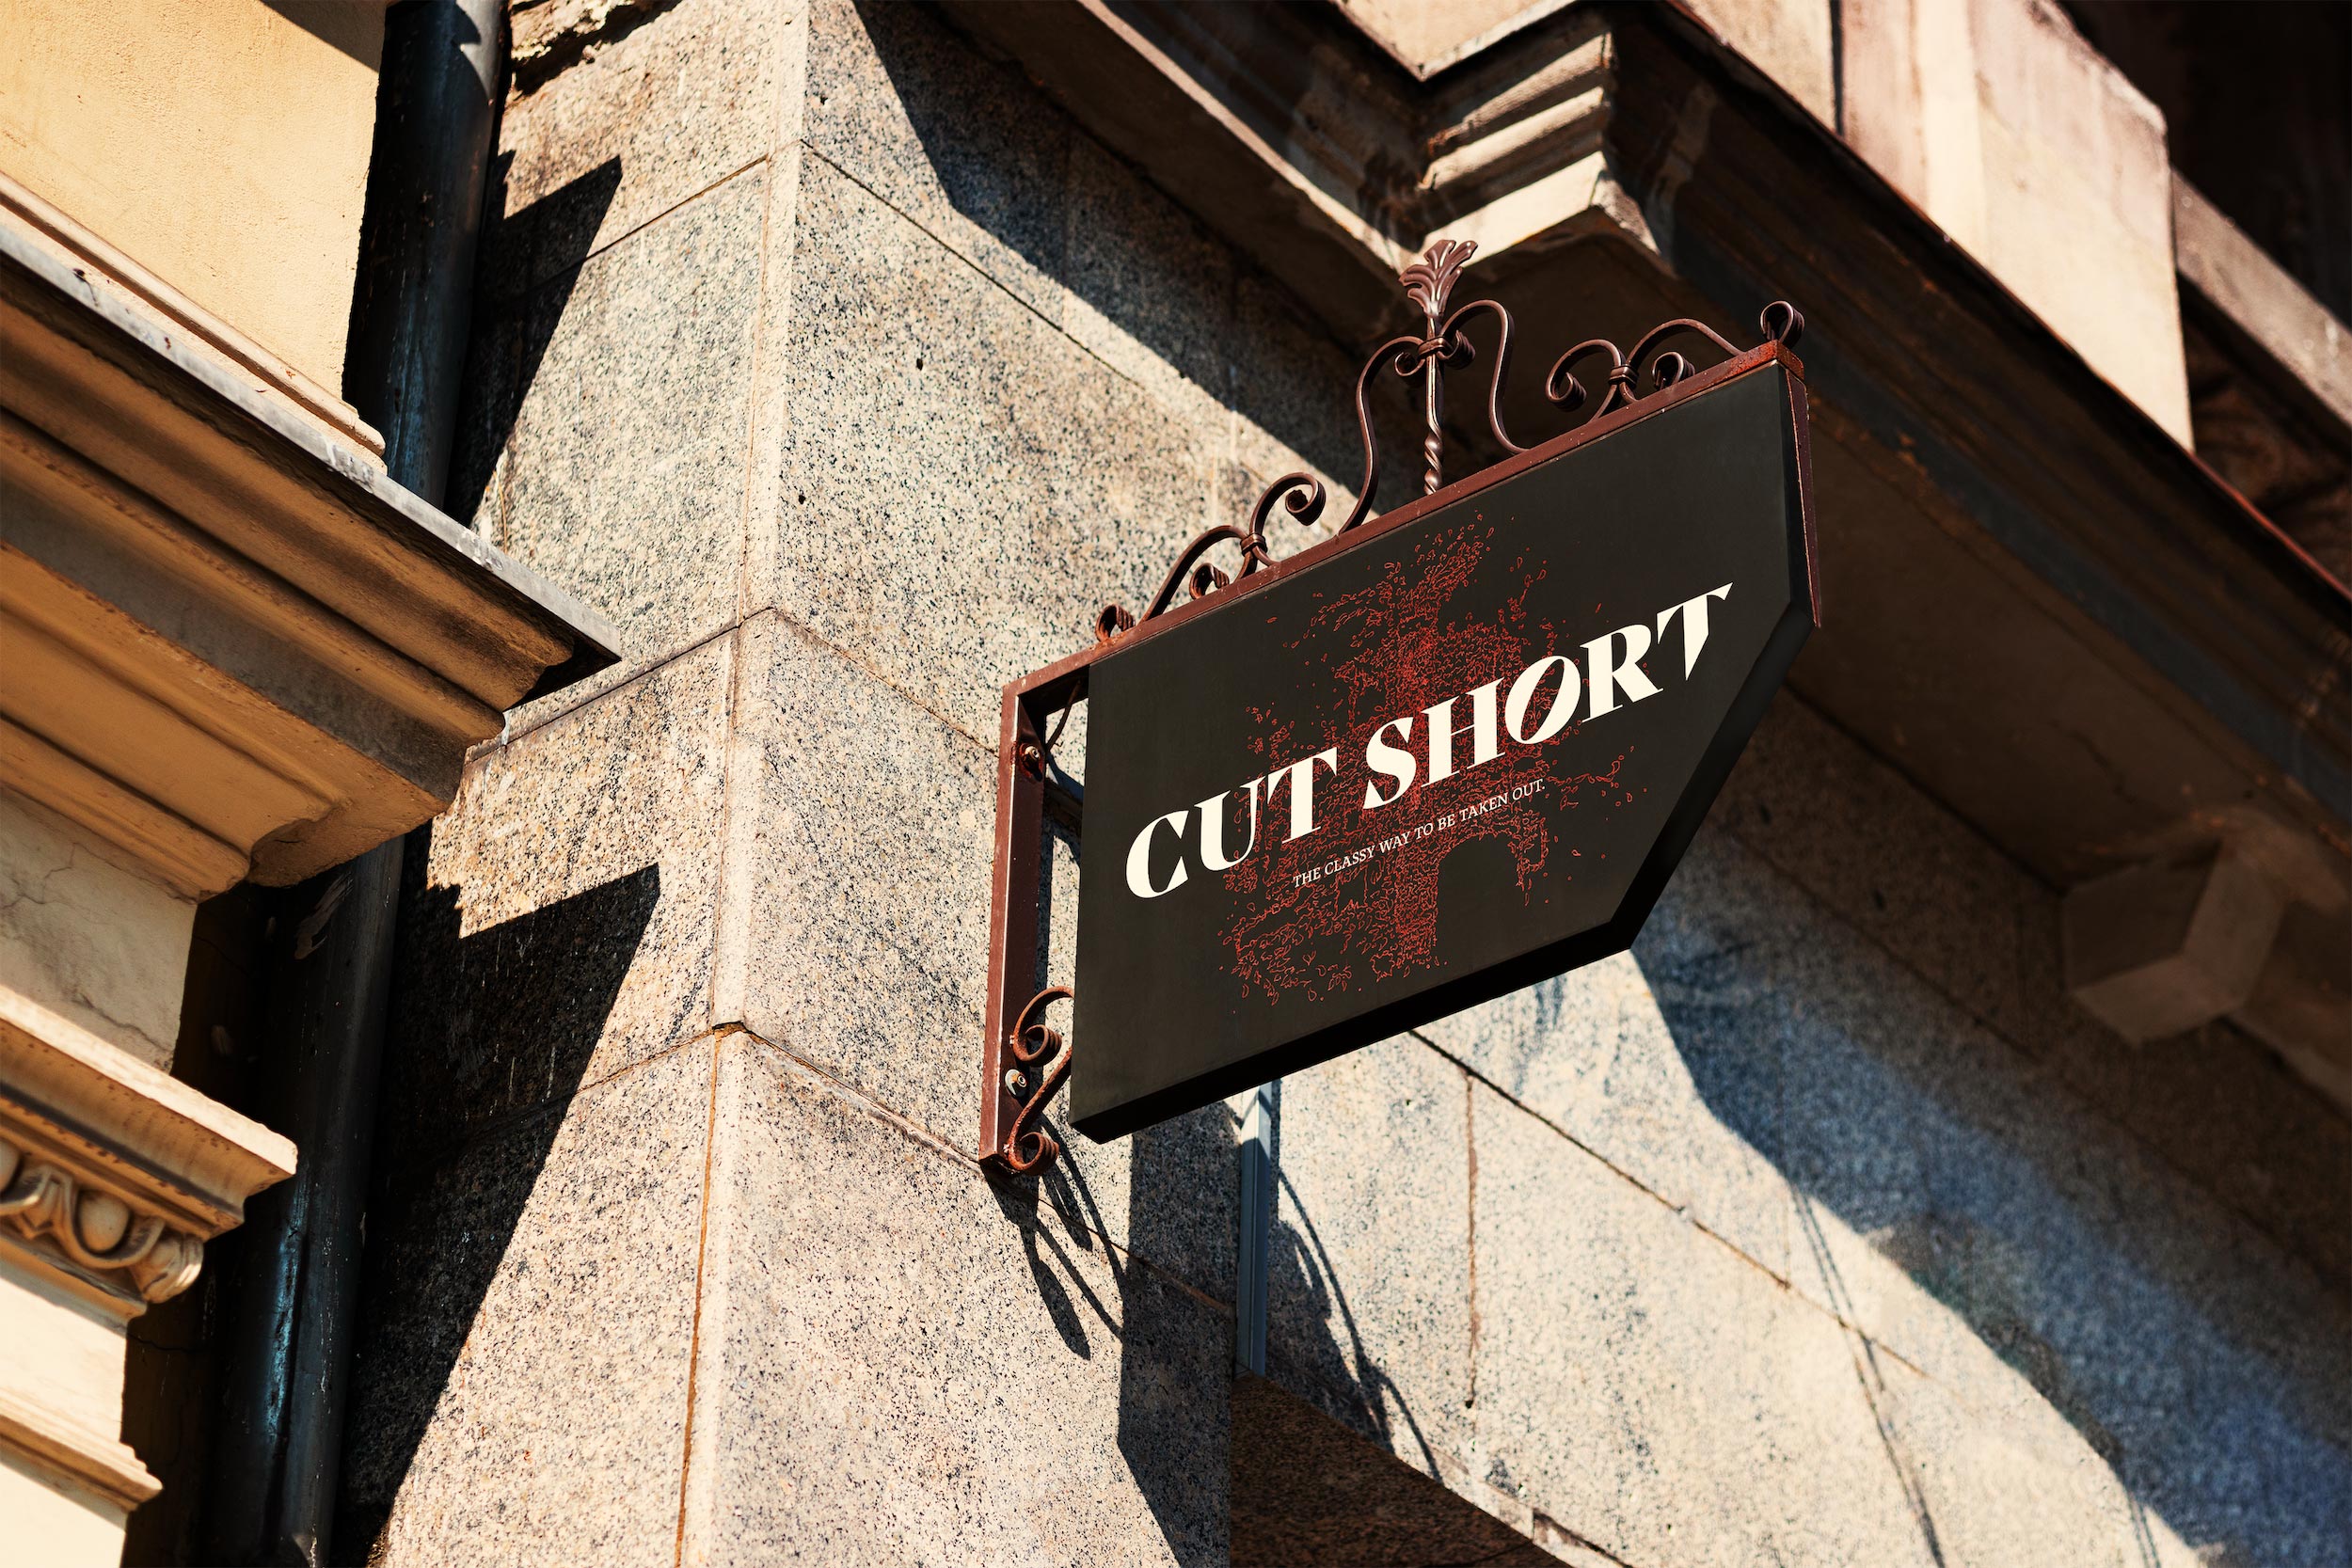 BA Graphic Communications work by Henry Gadsdon displaying the 'Cut Short' restaurant sign, a playful restaurant experience with an edge.